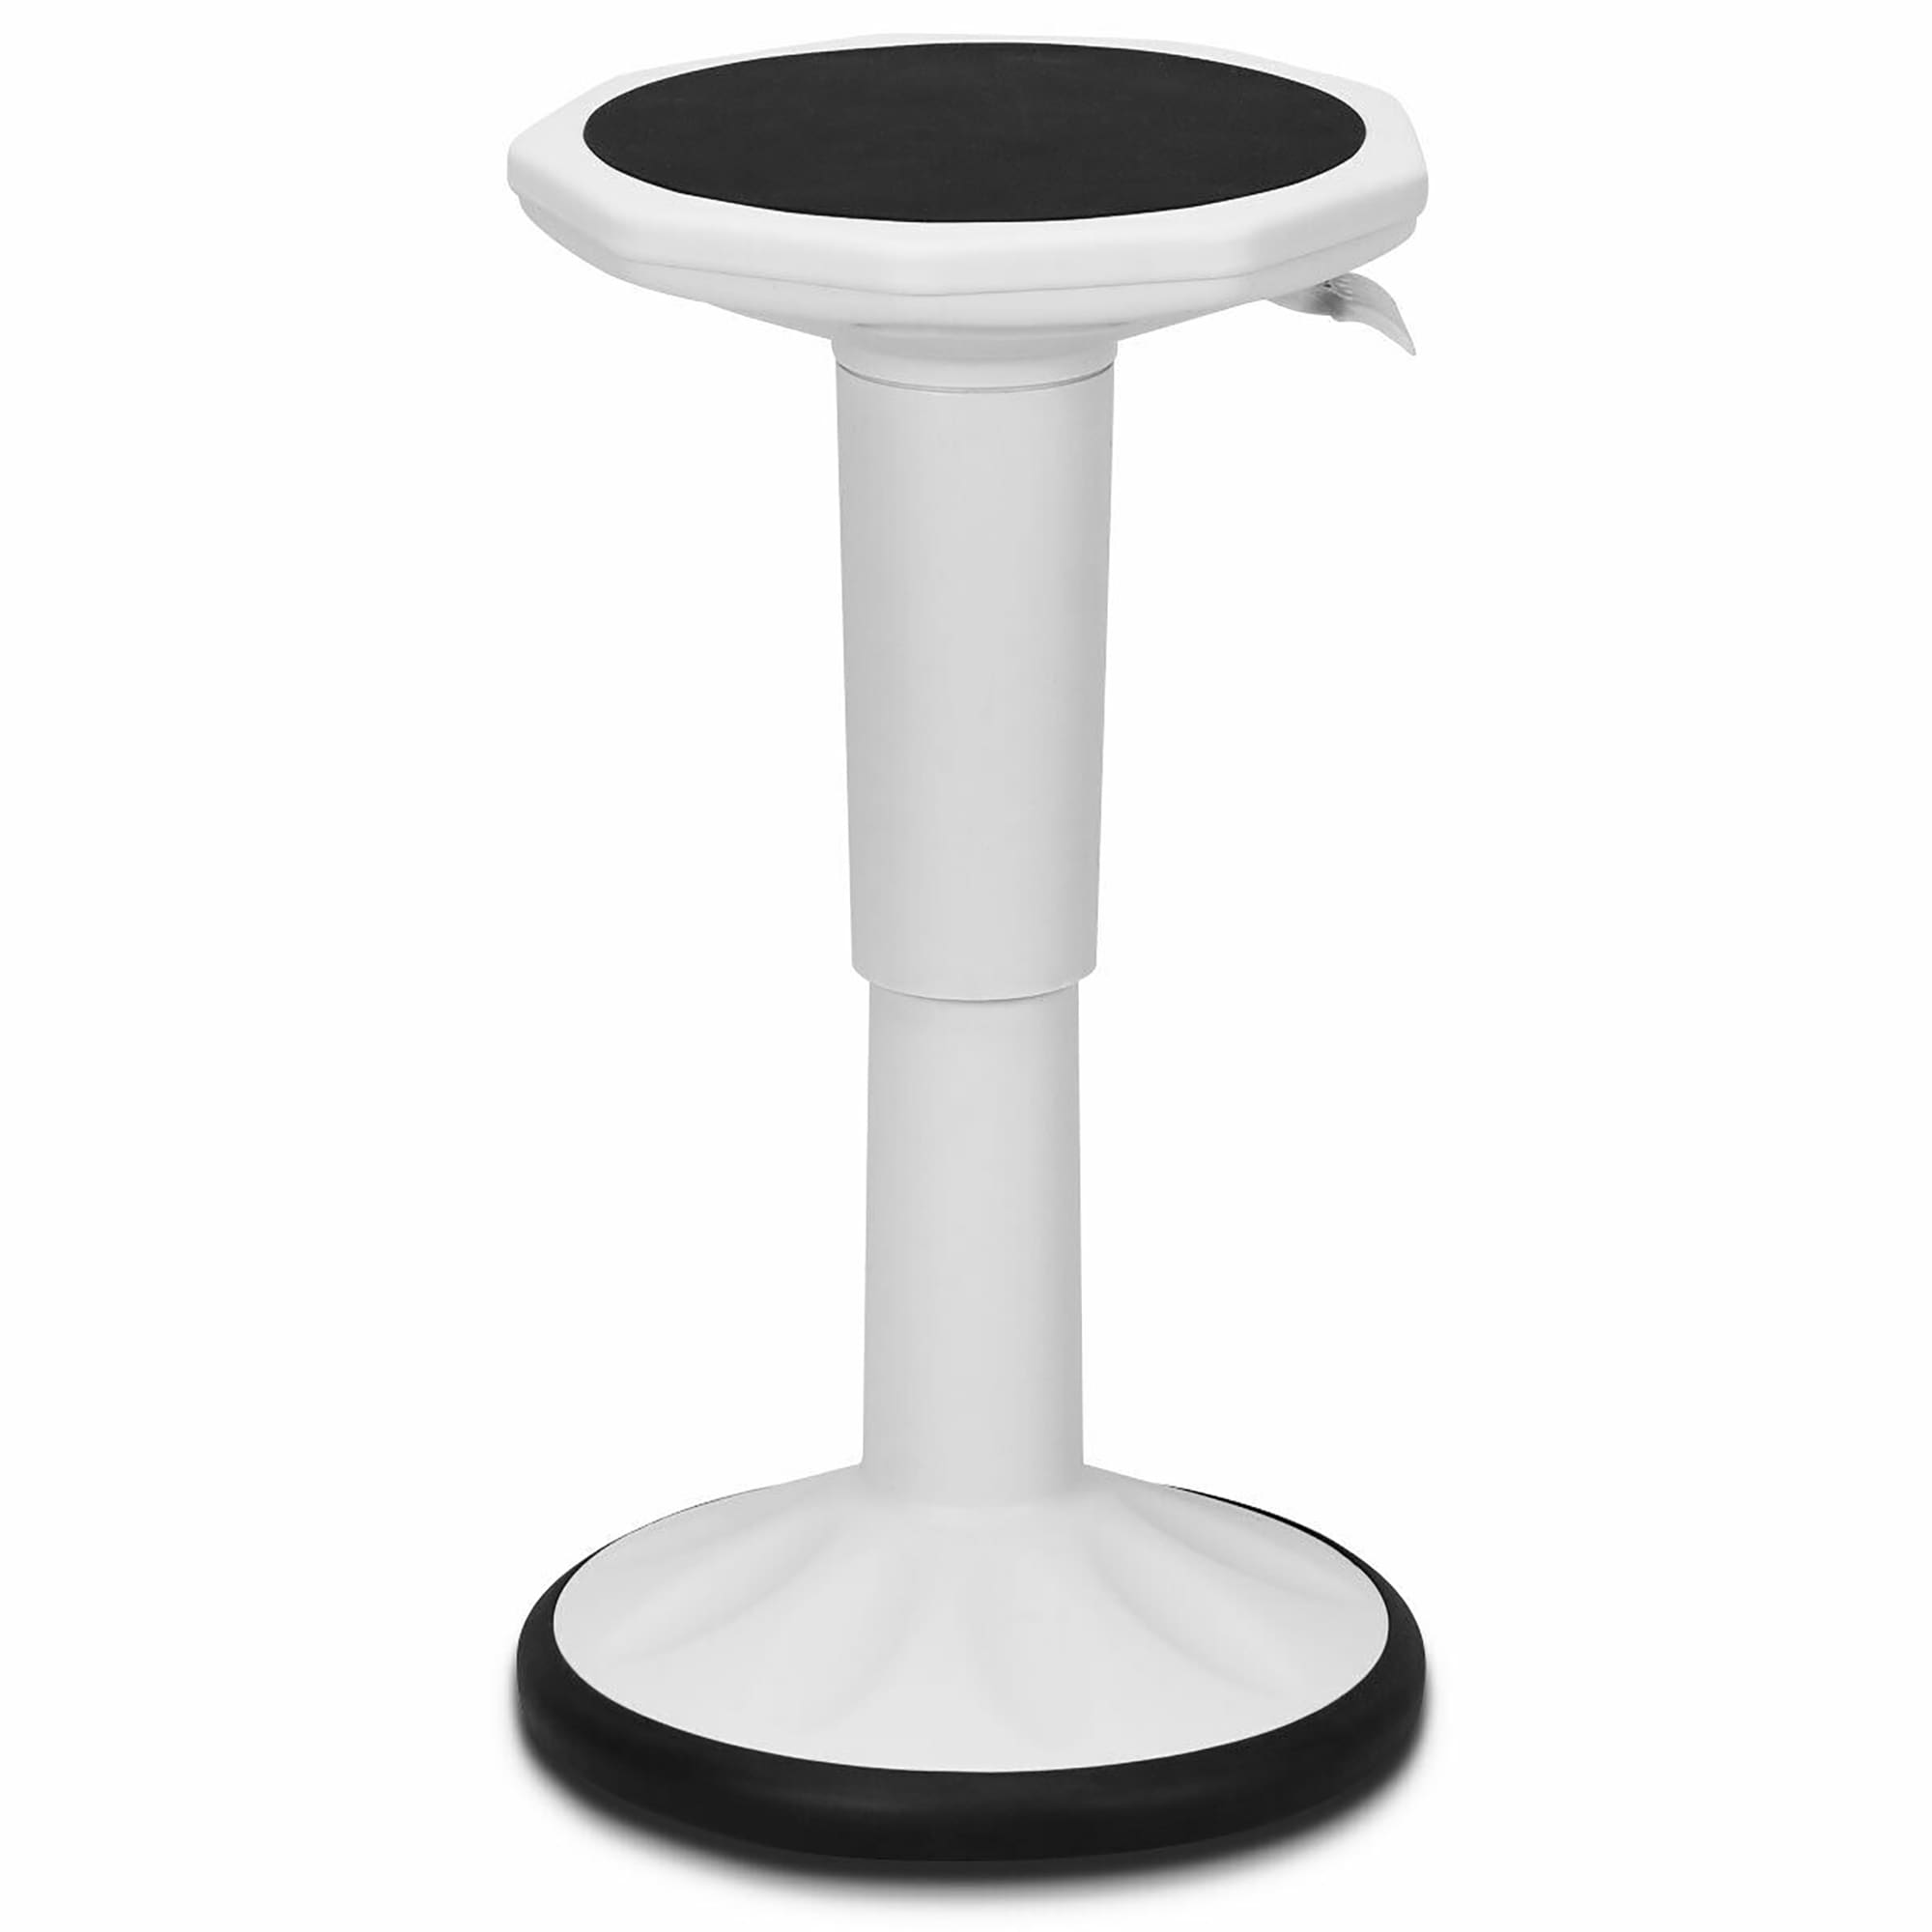 Wobble Chair Height Adjustable Wiggle Chair for Home and Office